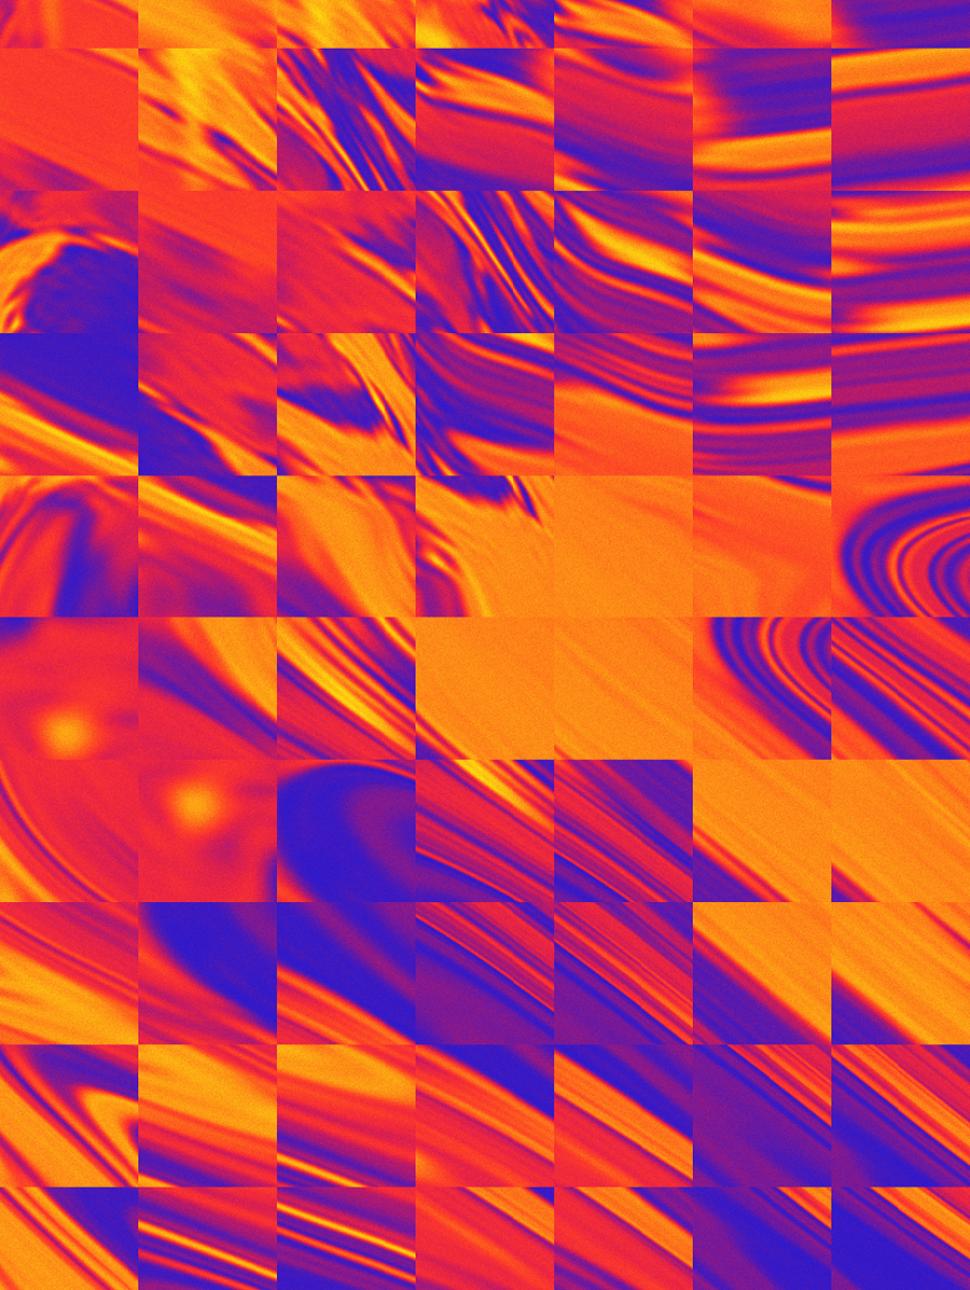 Colourful image of blue and orange gradients that has been cut into square tiles and rearranged. 